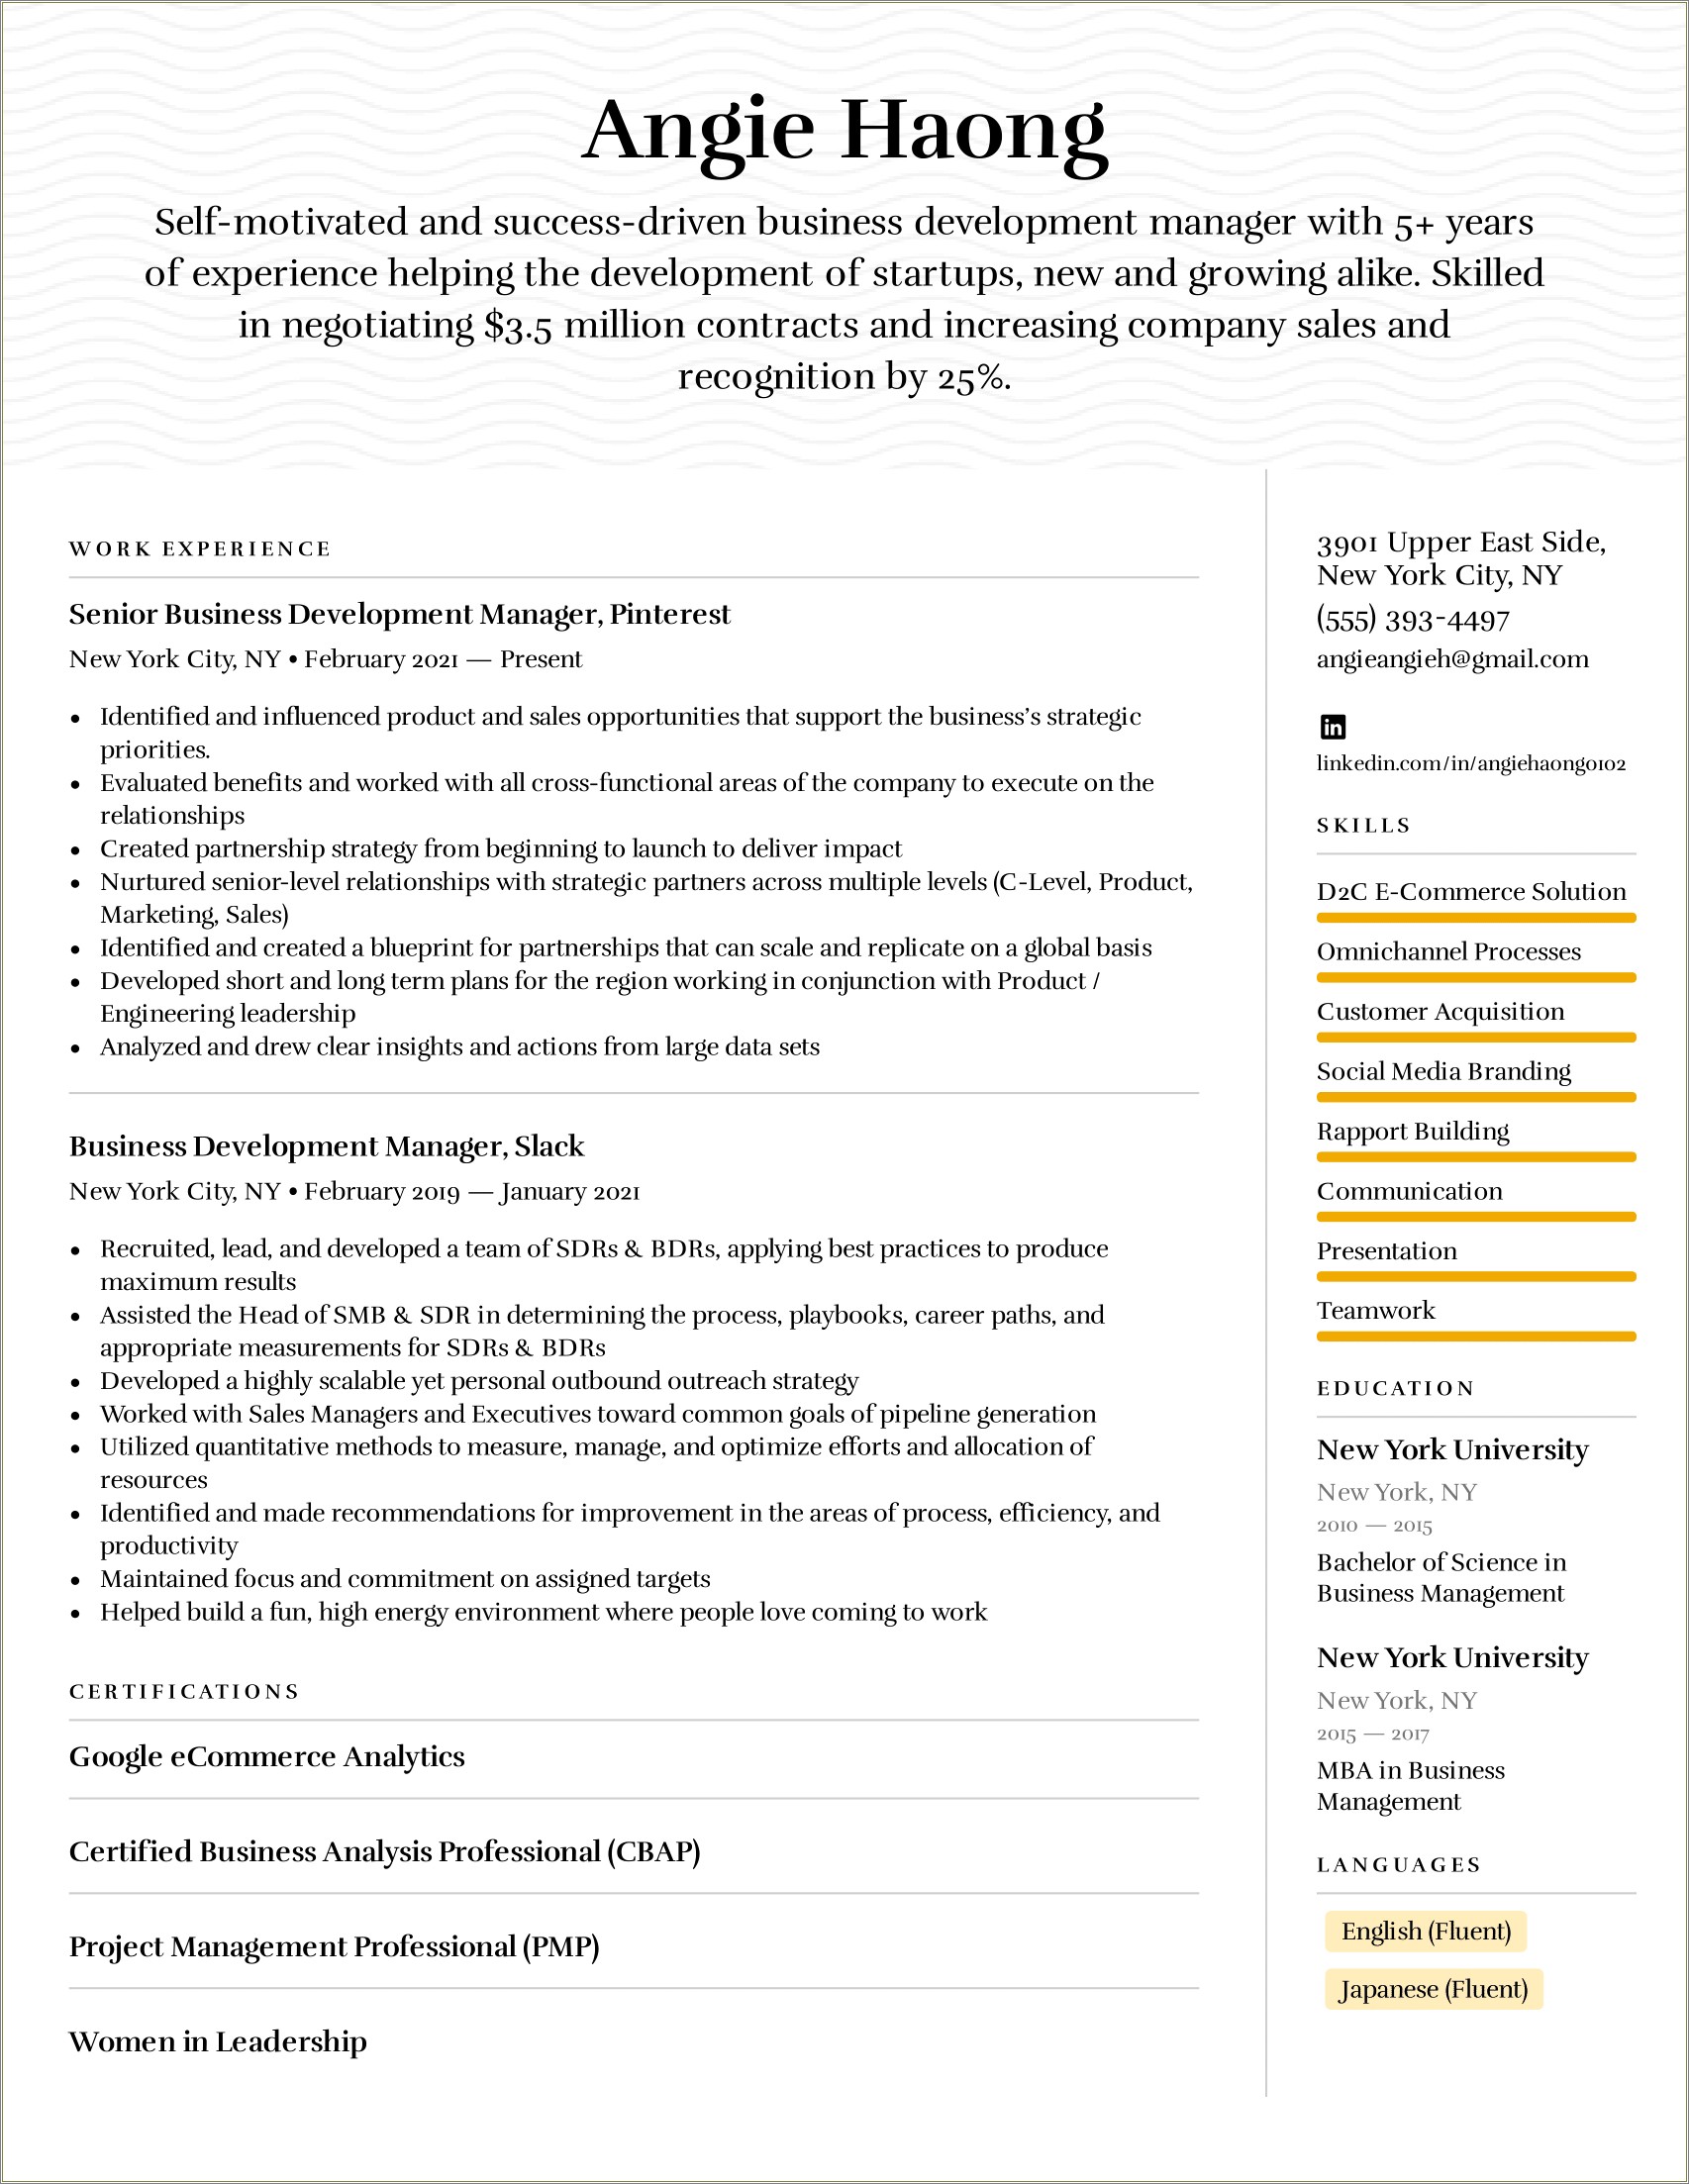 Computer Rpograms That Look Good On A Resume